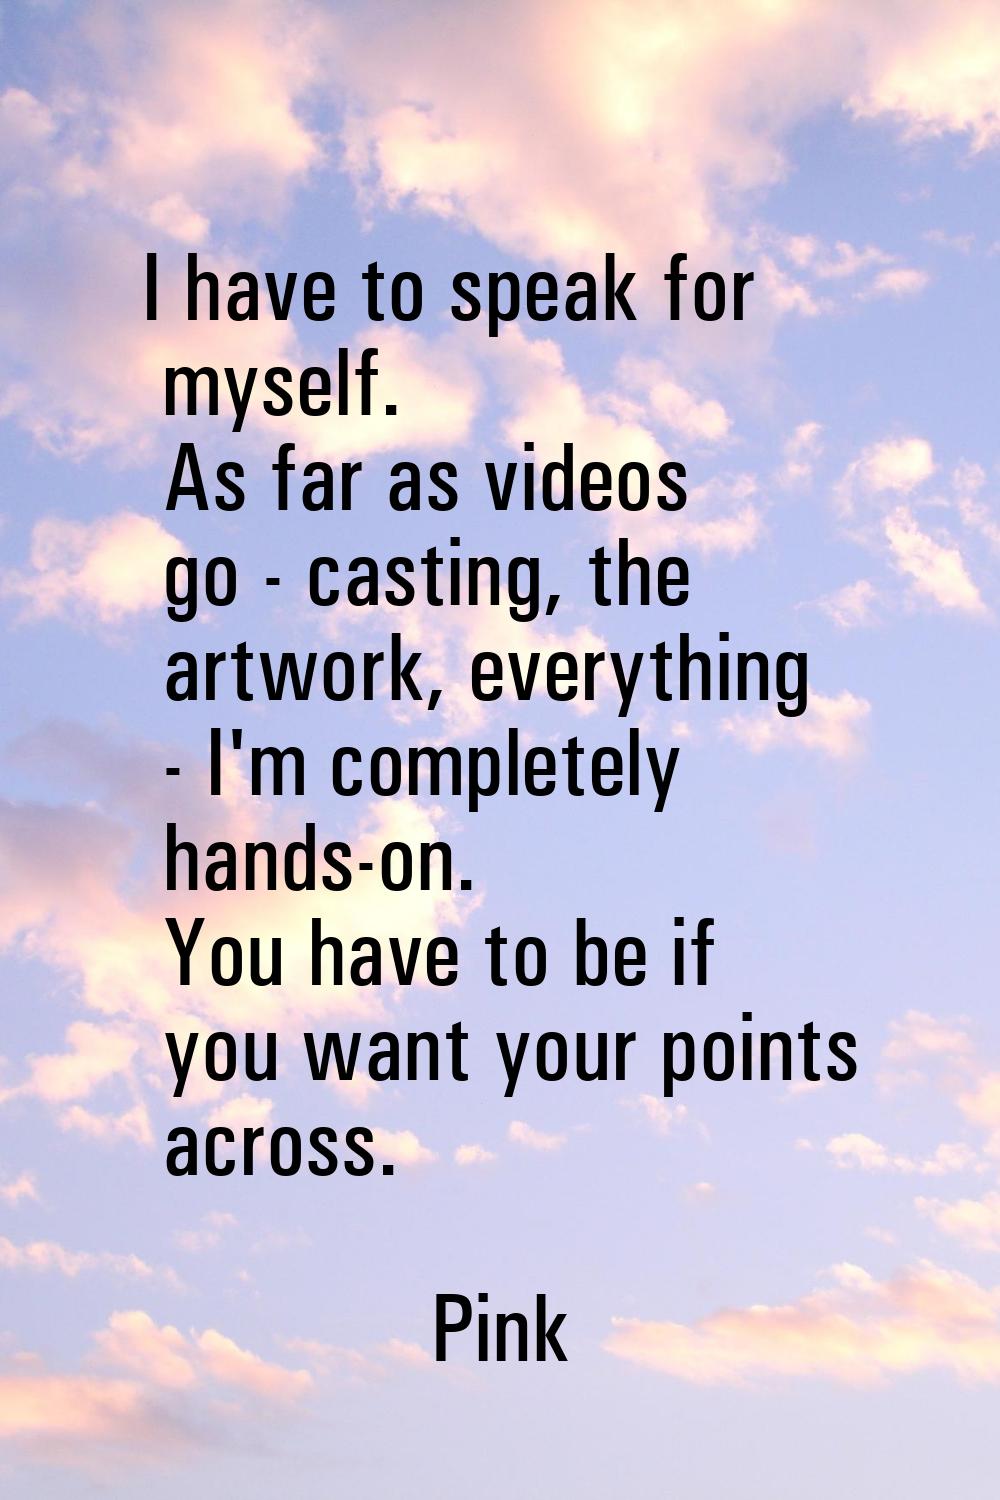 I have to speak for myself. As far as videos go - casting, the artwork, everything - I'm completely